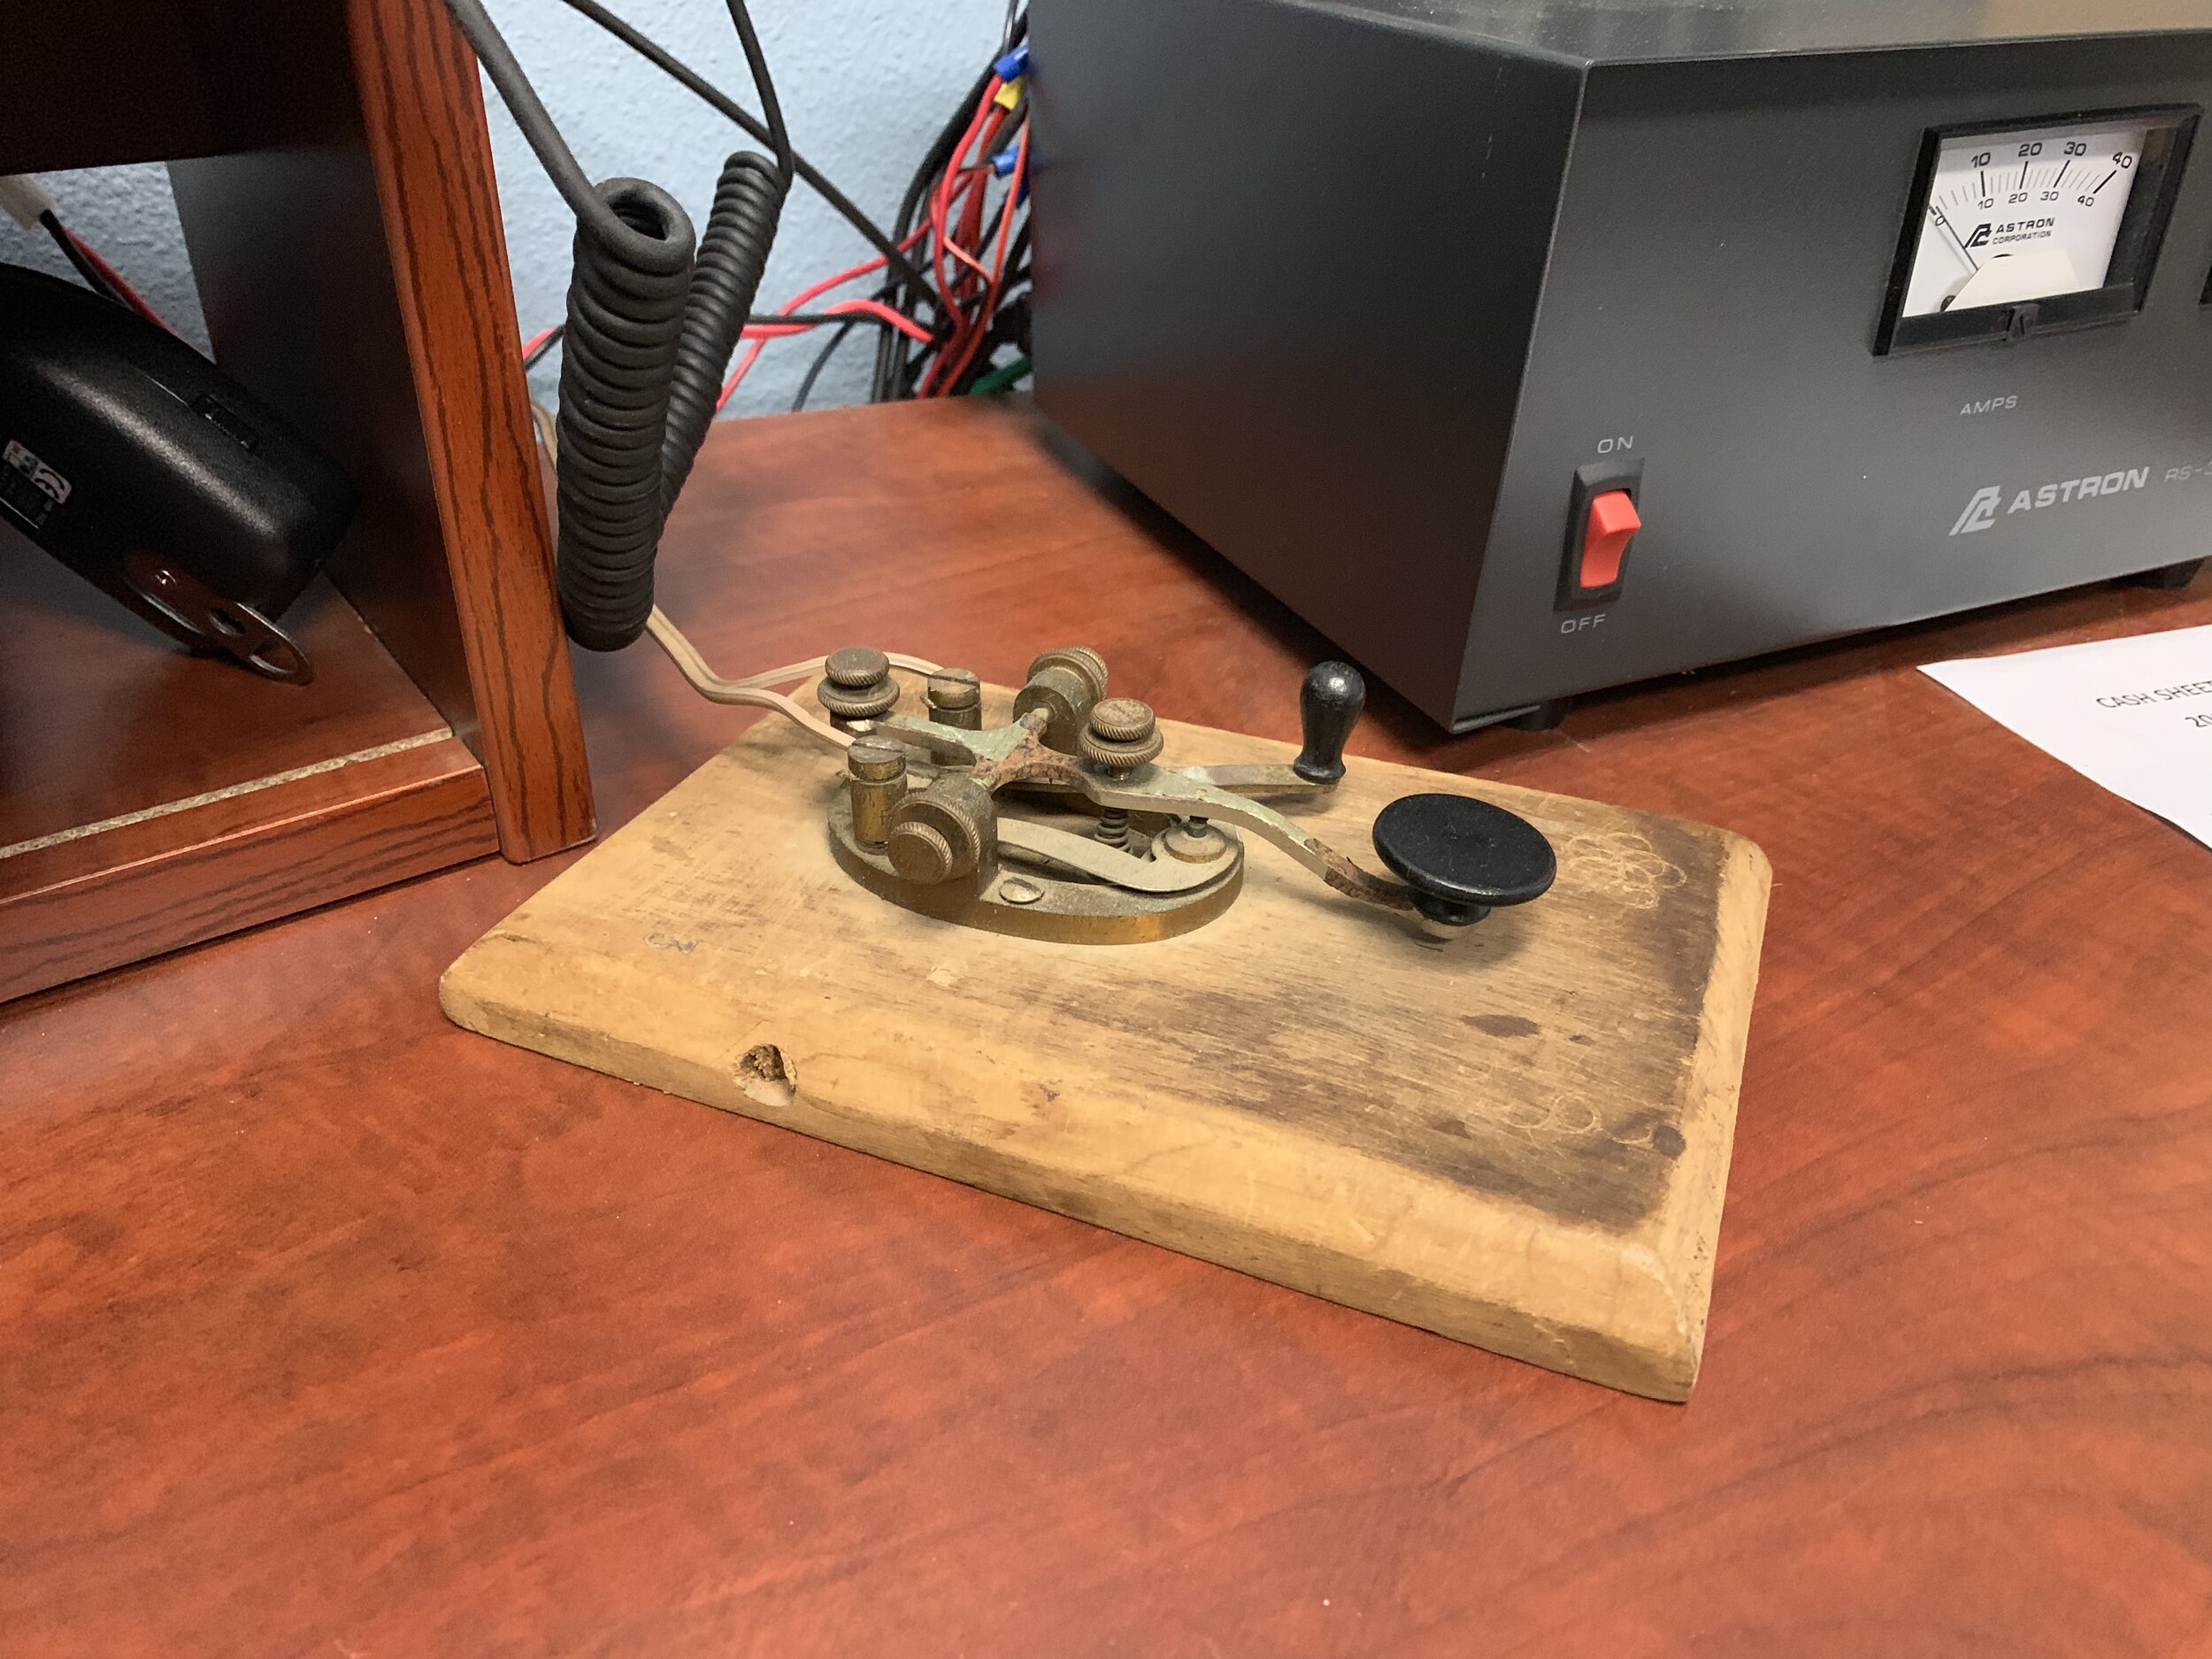 West Oregon Electric Co-op shows off an old Morse Code transmitter